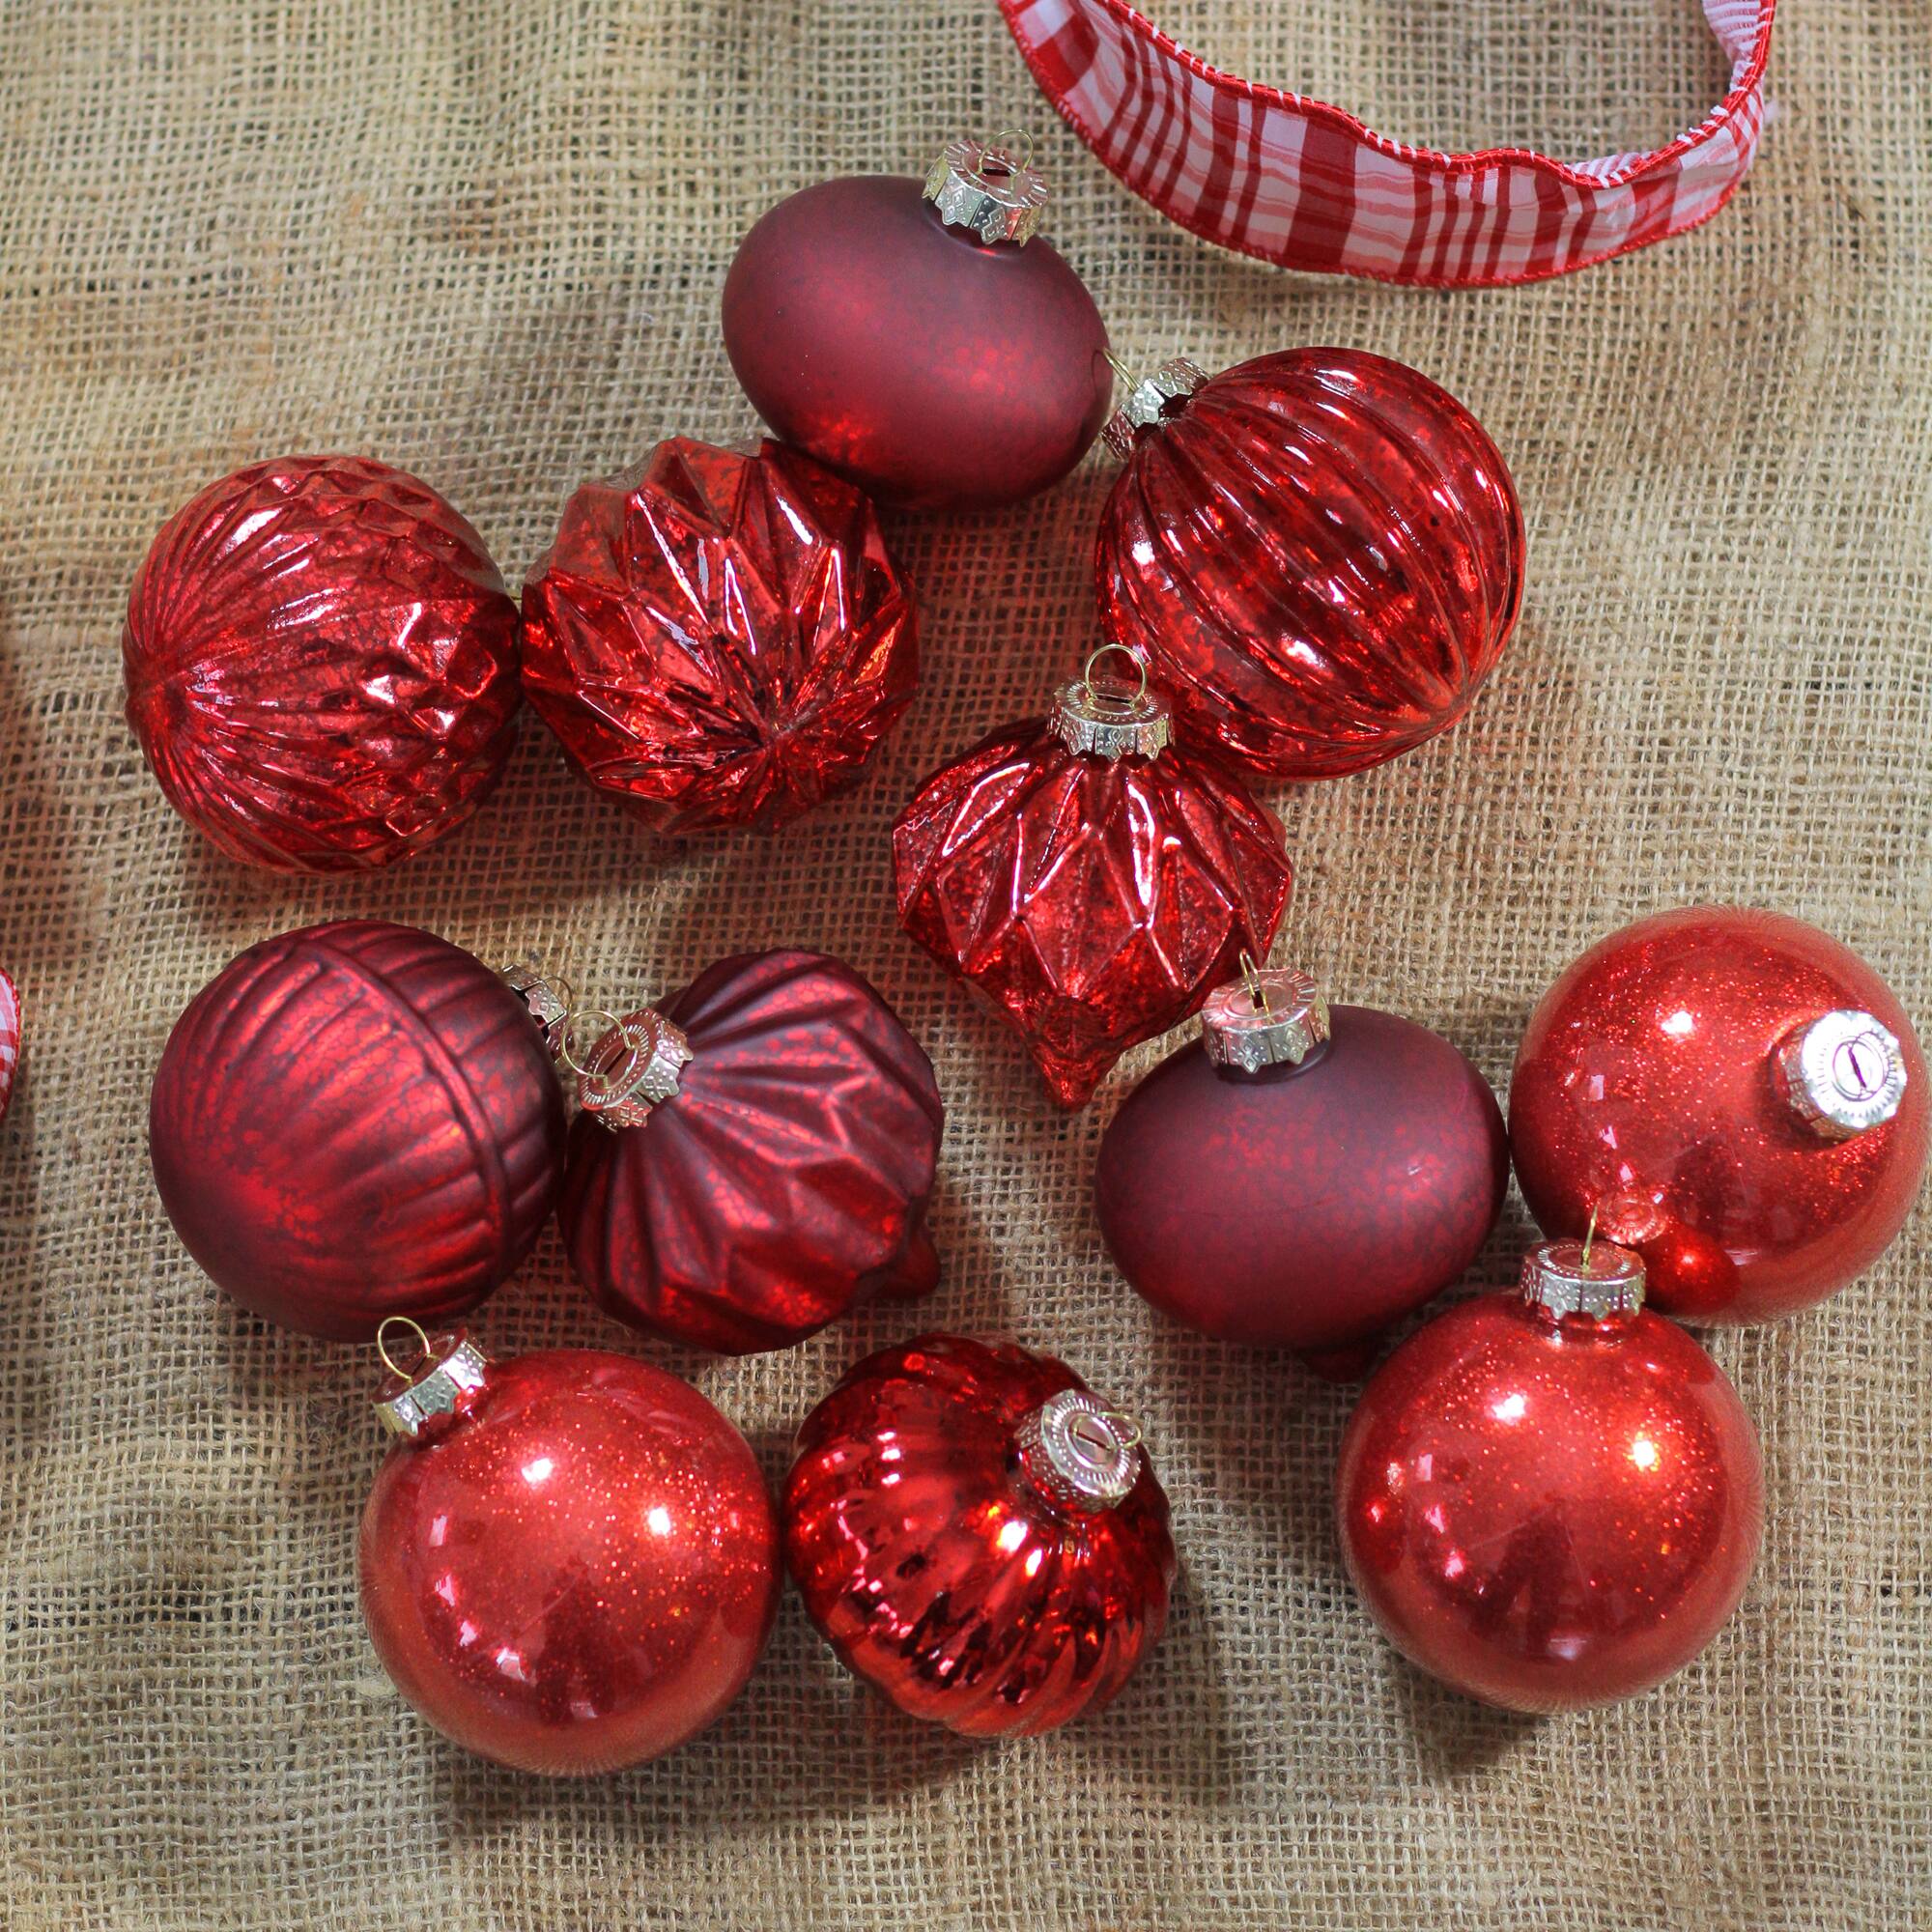 12ct. Red Mercury Glass Style Glass Ornaments